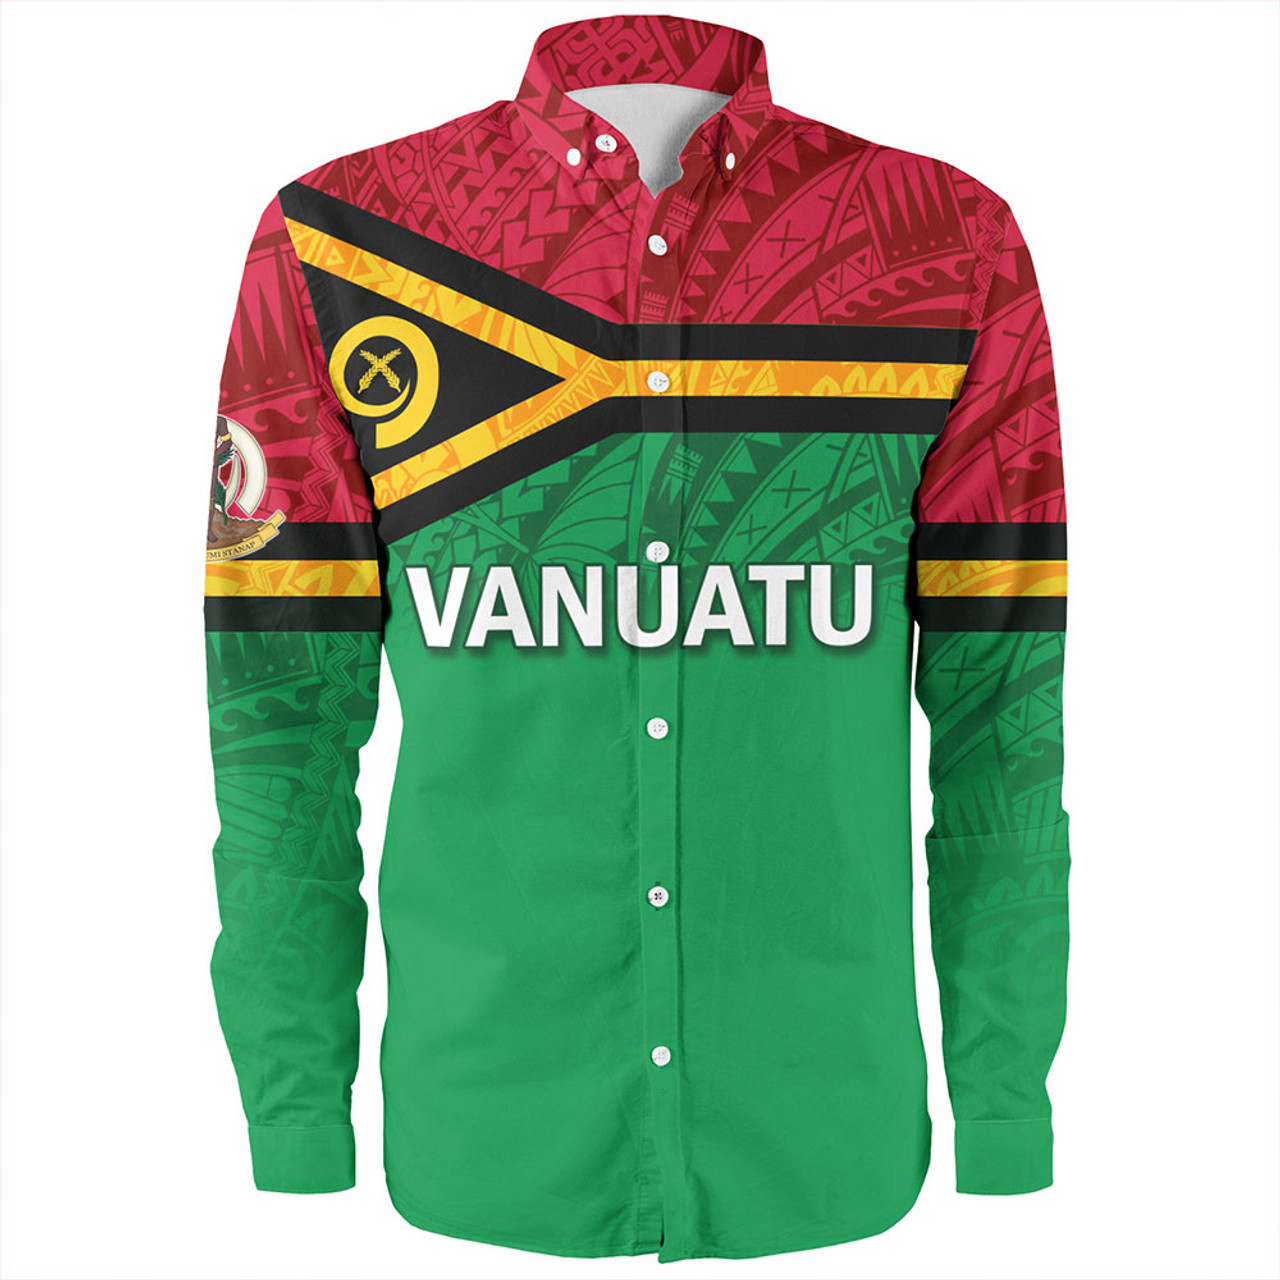 Vanuatu Long Sleeve Shirt - Flag Color With Traditional Patterns